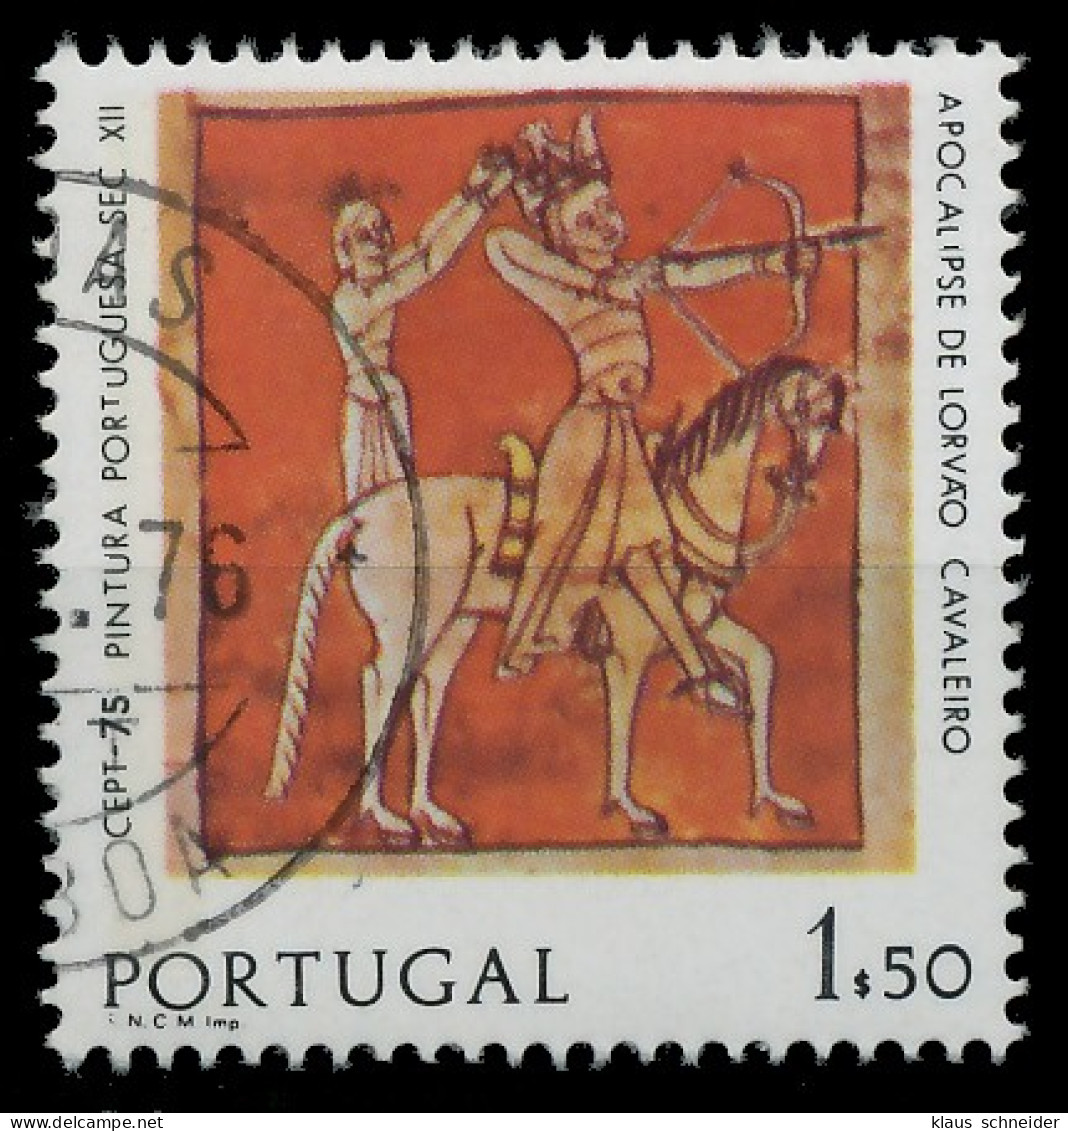 PORTUGAL 1975 Nr 1281y Gestempelt X0453A6 - Used Stamps